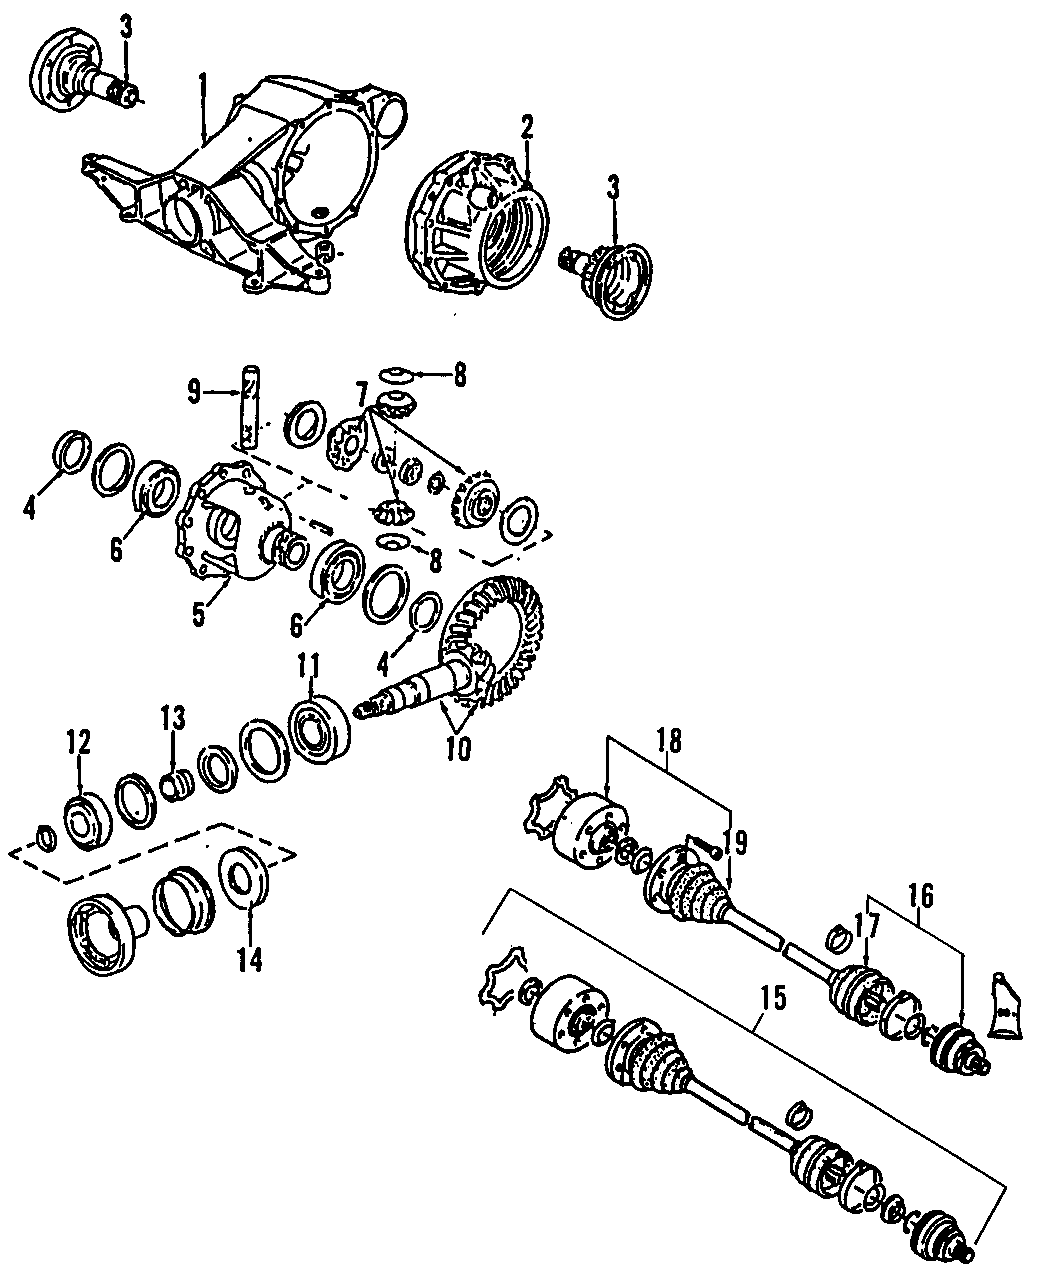 DRIVE AXLES. REAR AXLE. AXLE SHAFTS & JOINTS. DIFFERENTIAL. PROPELLER SHAFT.https://images.simplepart.com/images/parts/motor/fullsize/F257120.png